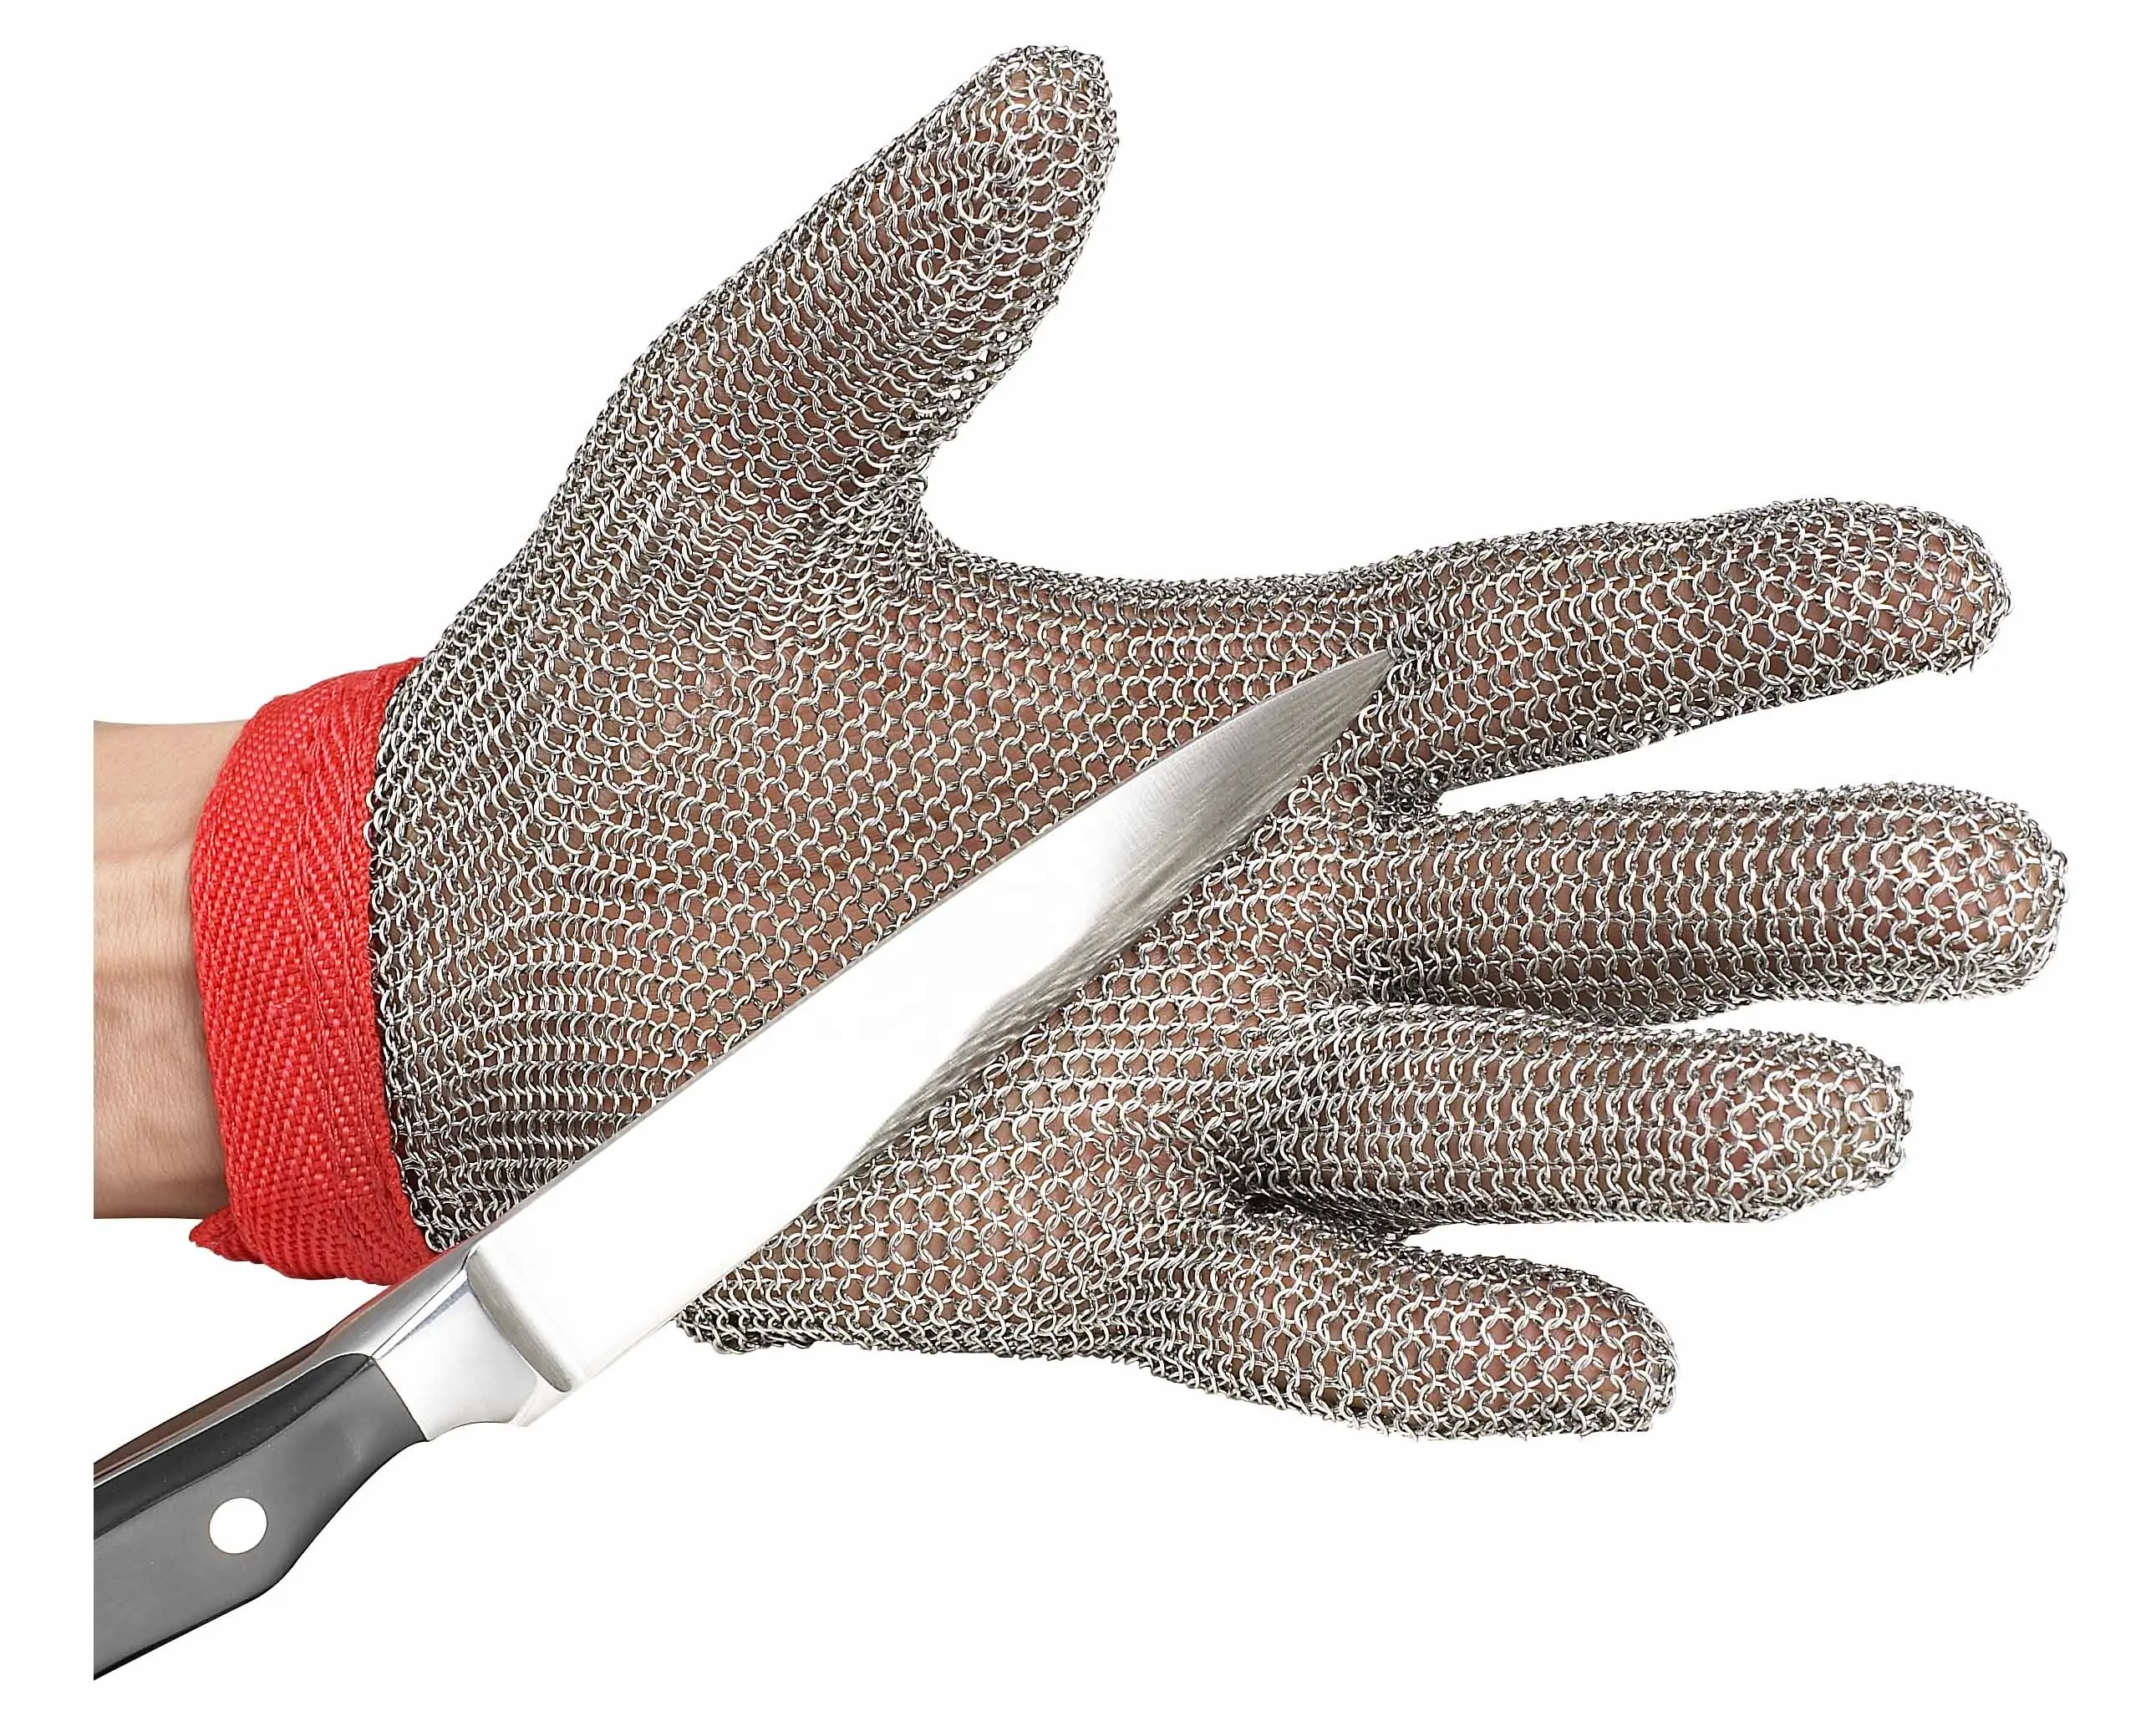 Cheap Price Metal mesh gloves 316L Stainless steel Cut Resistant Glove Anti Cut Knife Blade Proof Safety Protection Glove